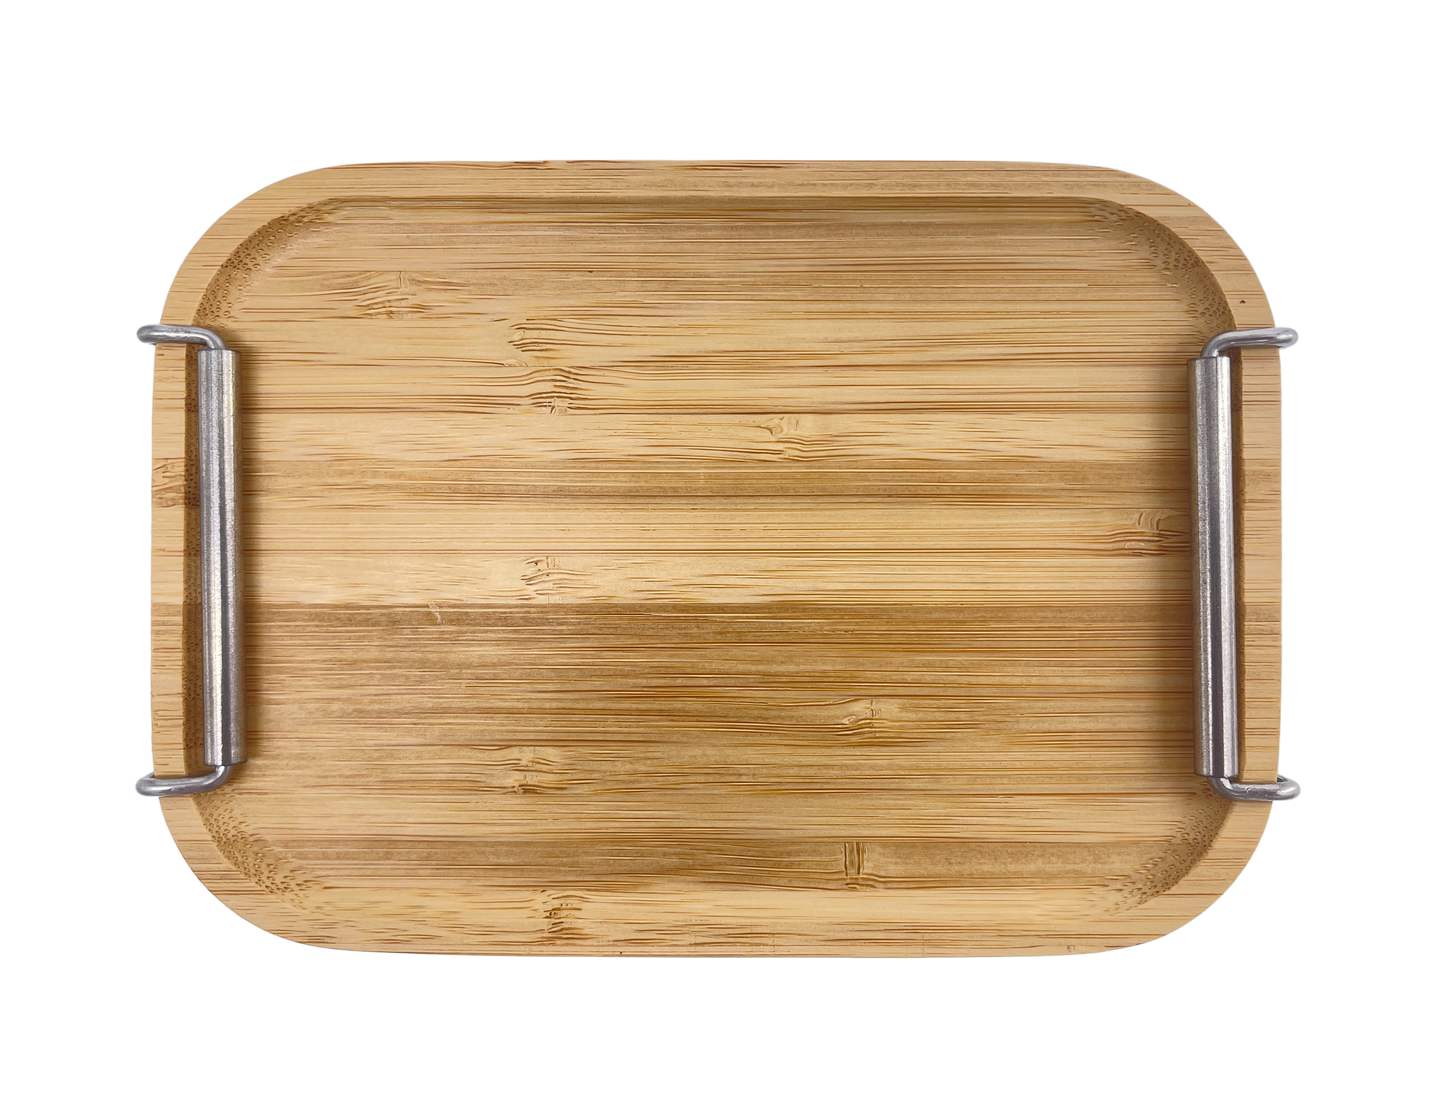 Stainless steel lunch box with bamboo lid